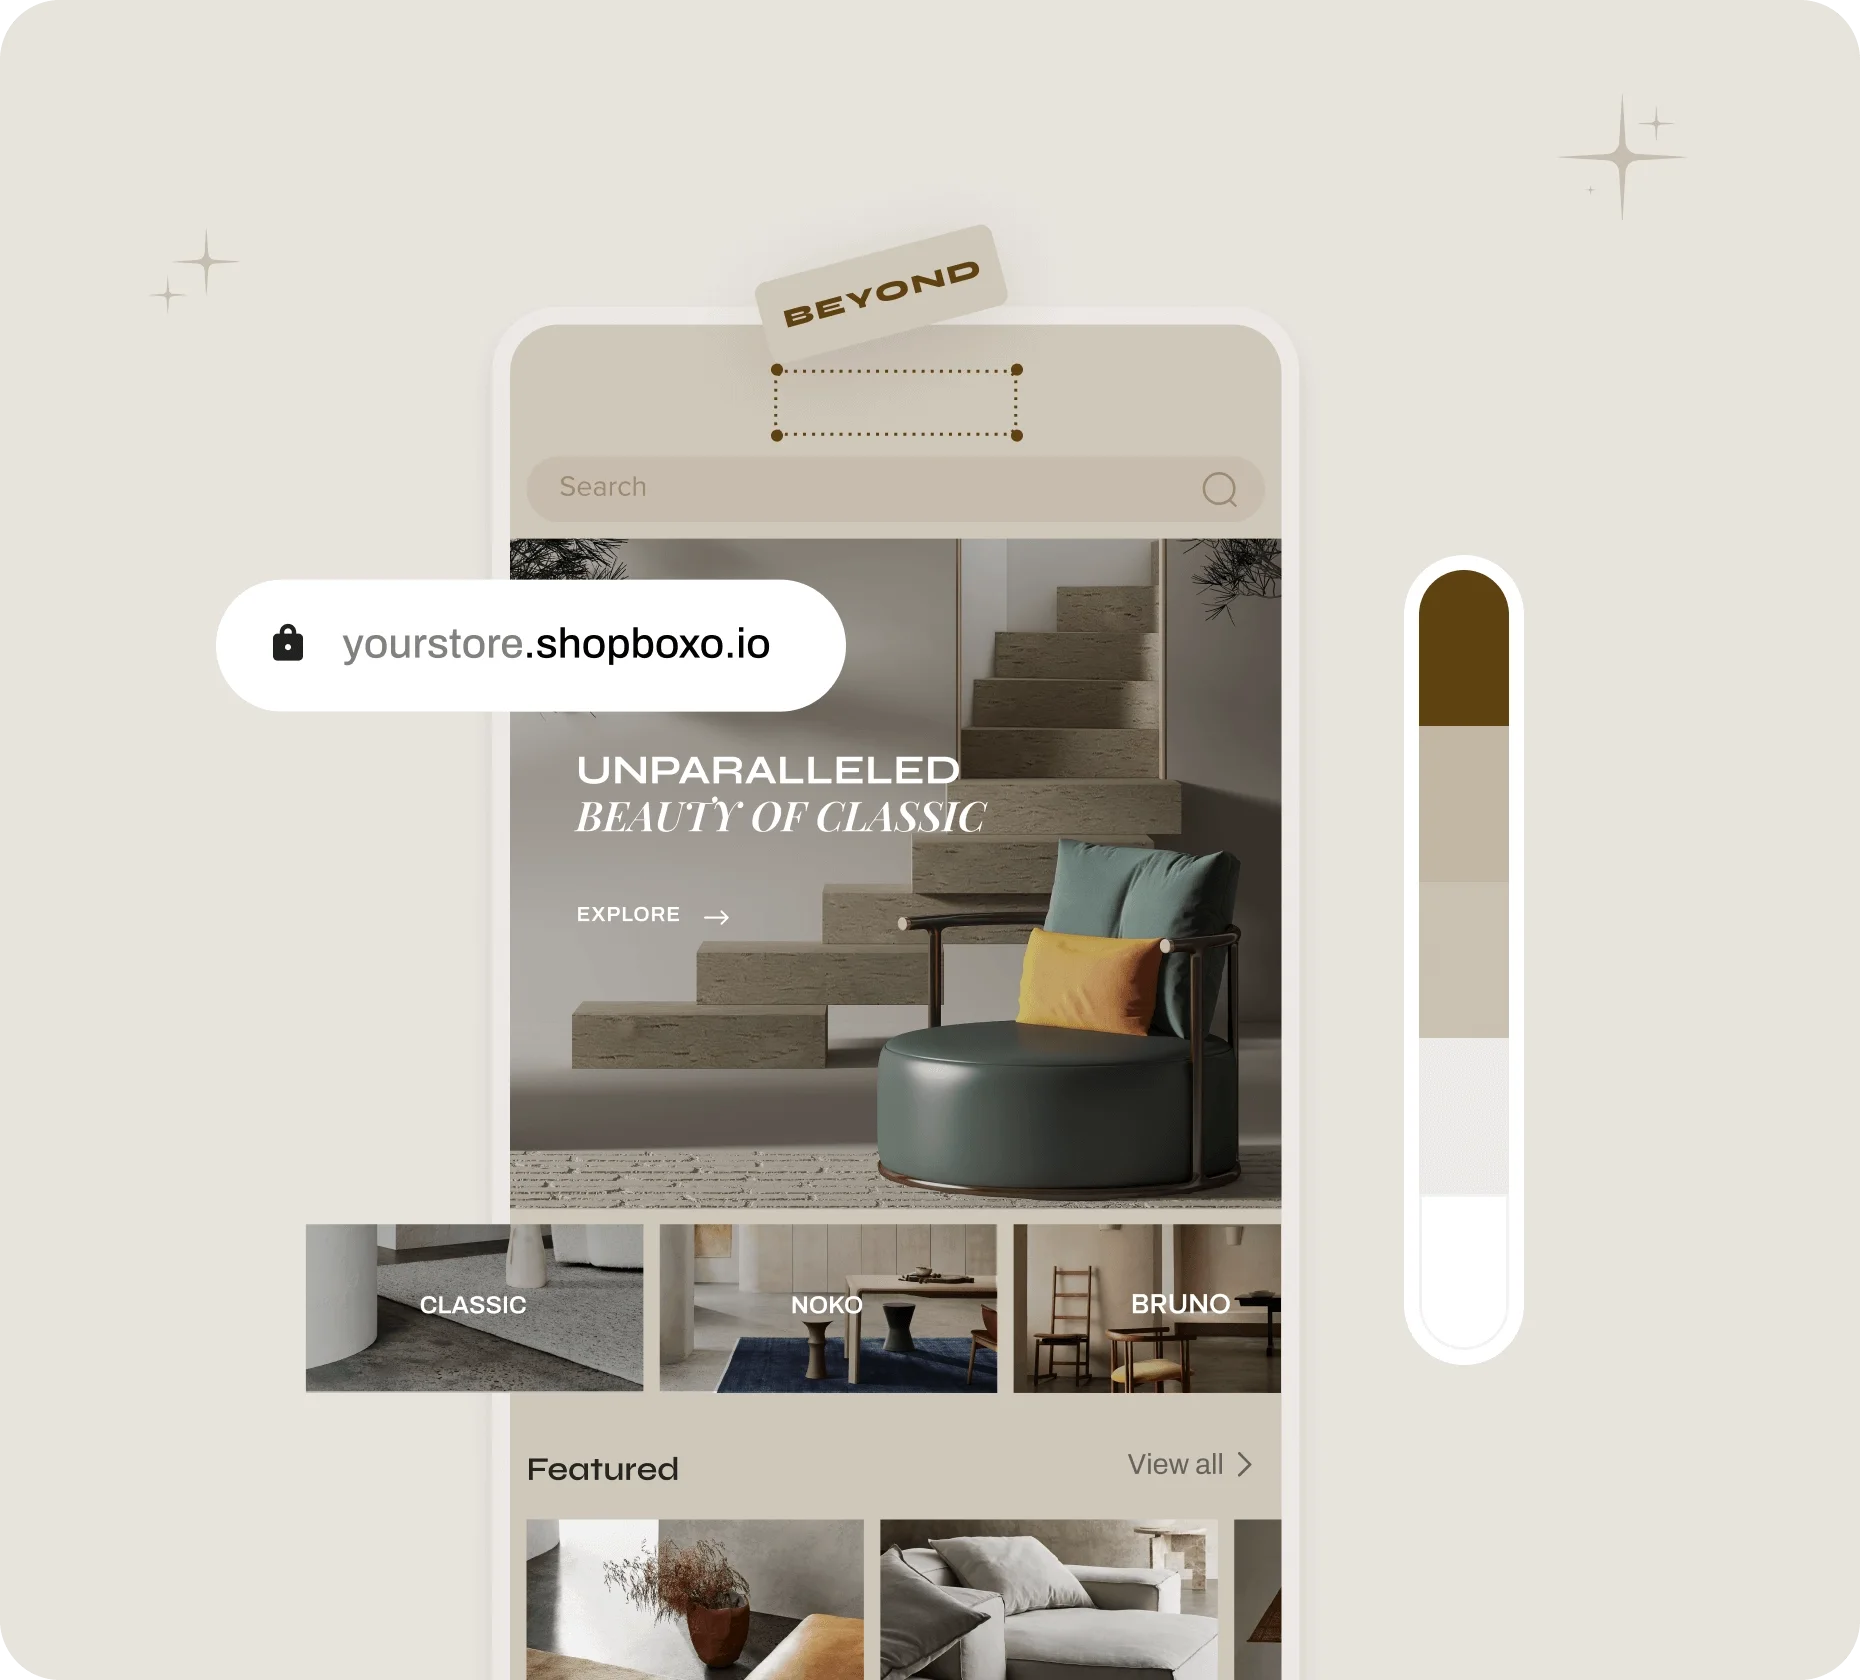 Mobile Interface Sample for a Furniture Online Store